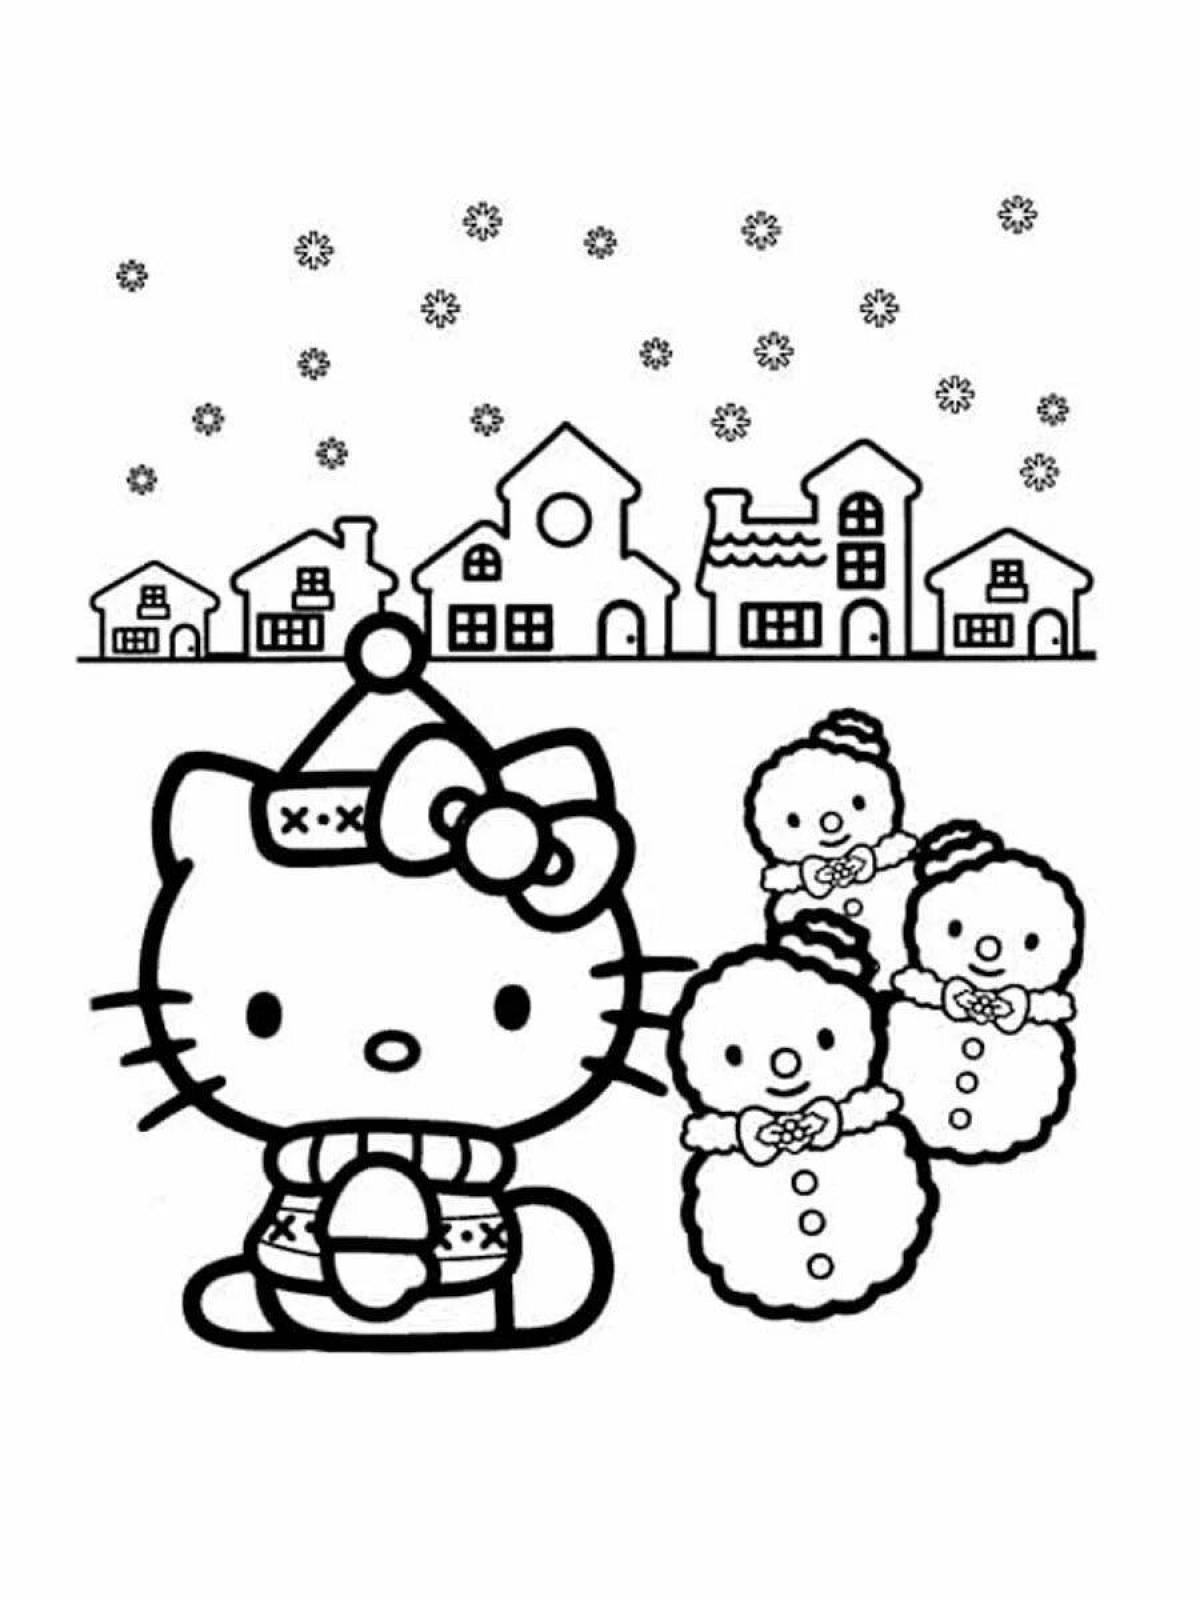 Playful coloring penguin hello kitty